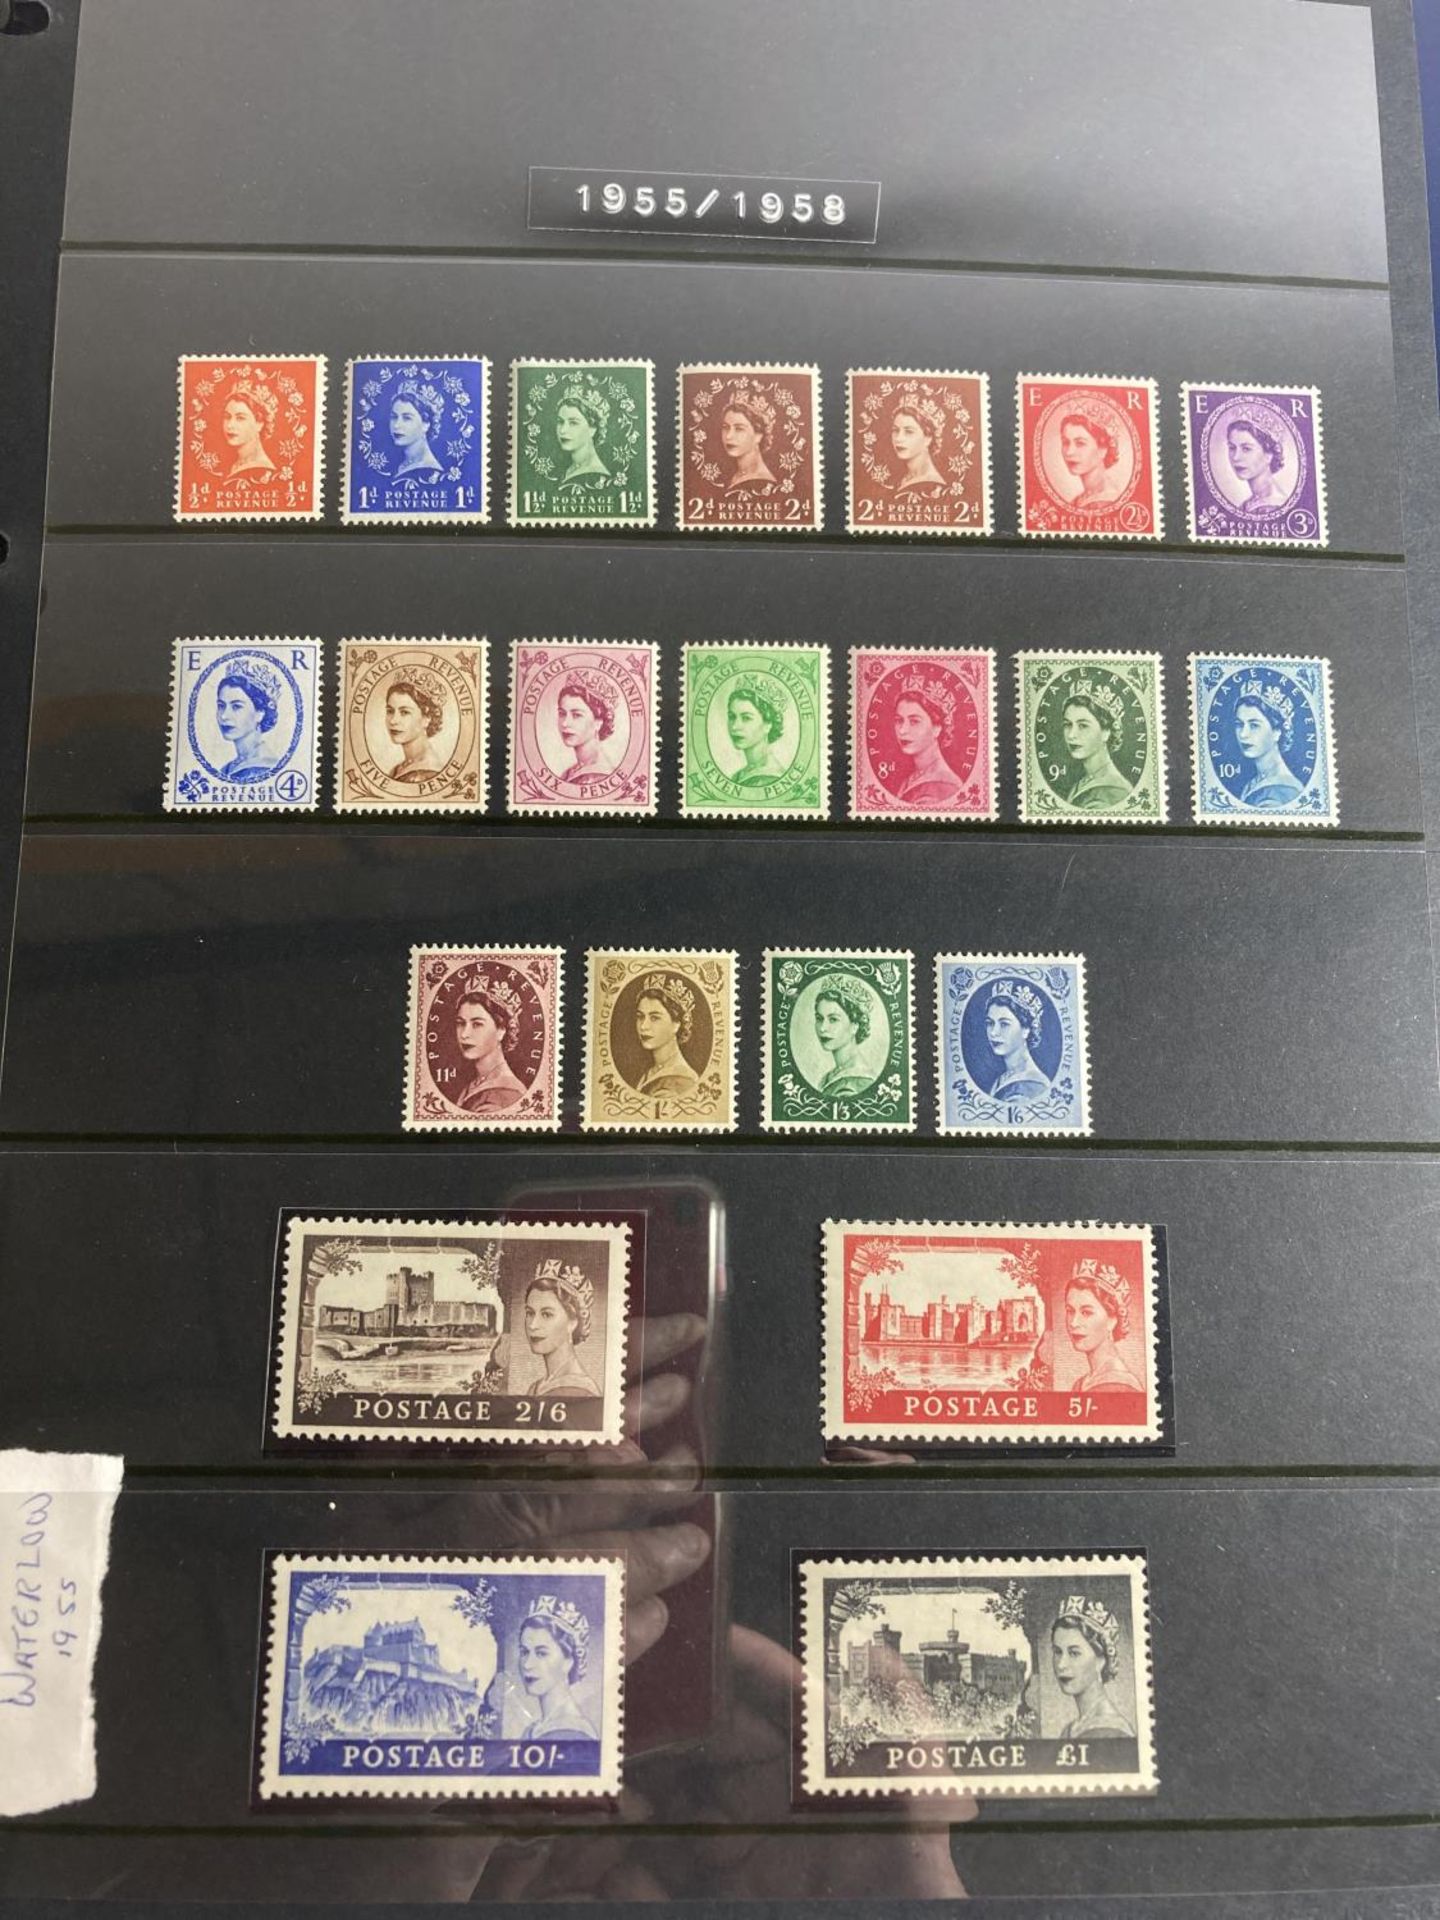 A SUPERB UNMOUNTED MINT COLLECTION OF GB , QE11 , EARLY DEFINITIVES , TO INCLUDE 1955 “CASTLES” - Image 3 of 6